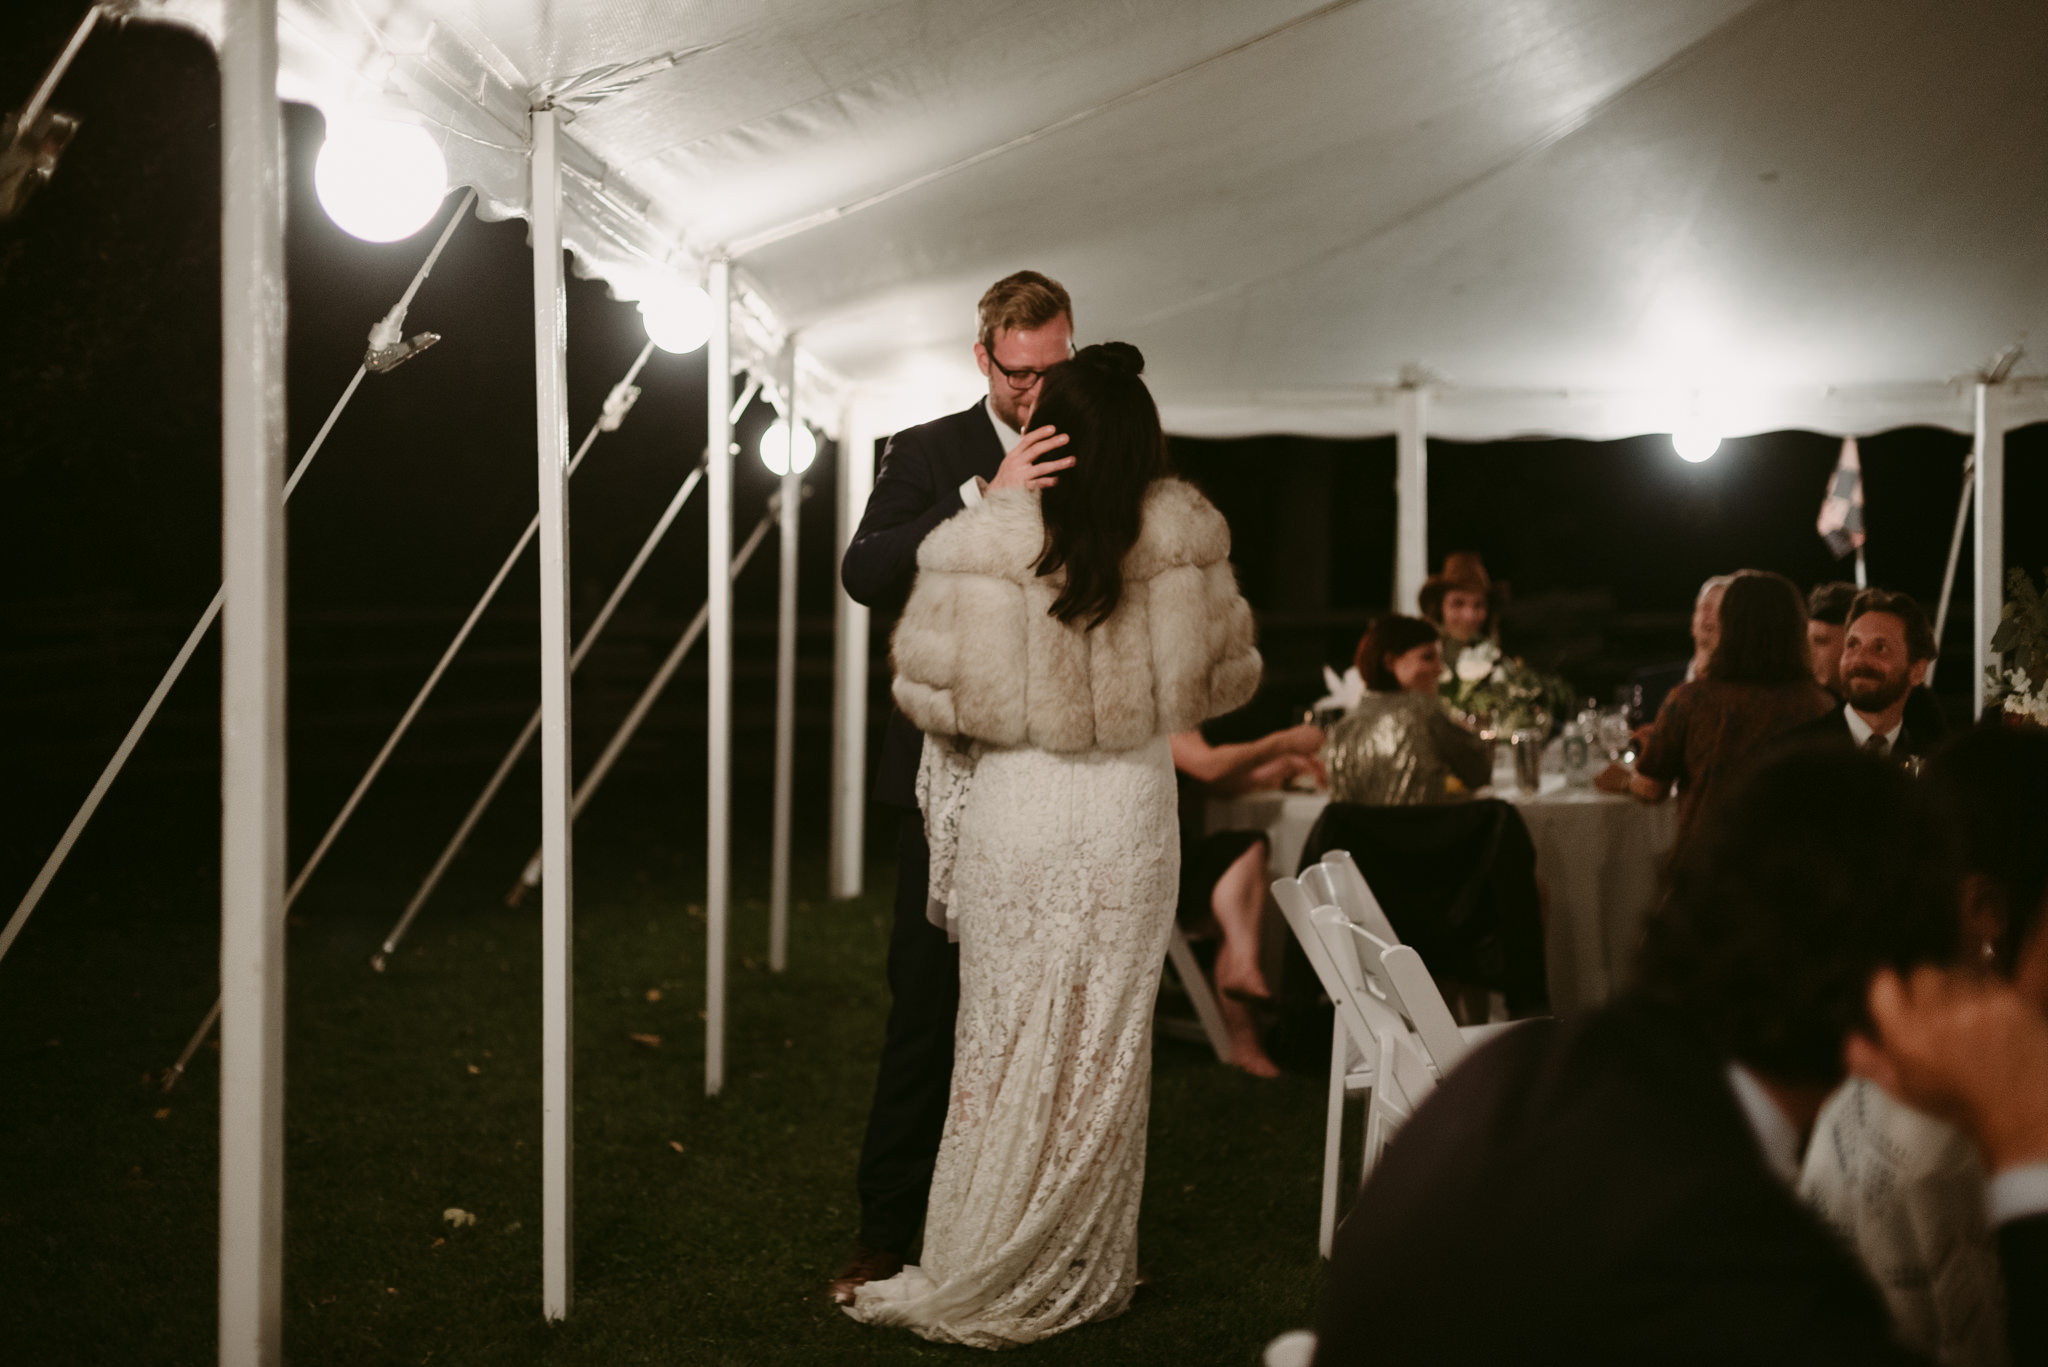 Bride and groom kissing in tent at wedding reception